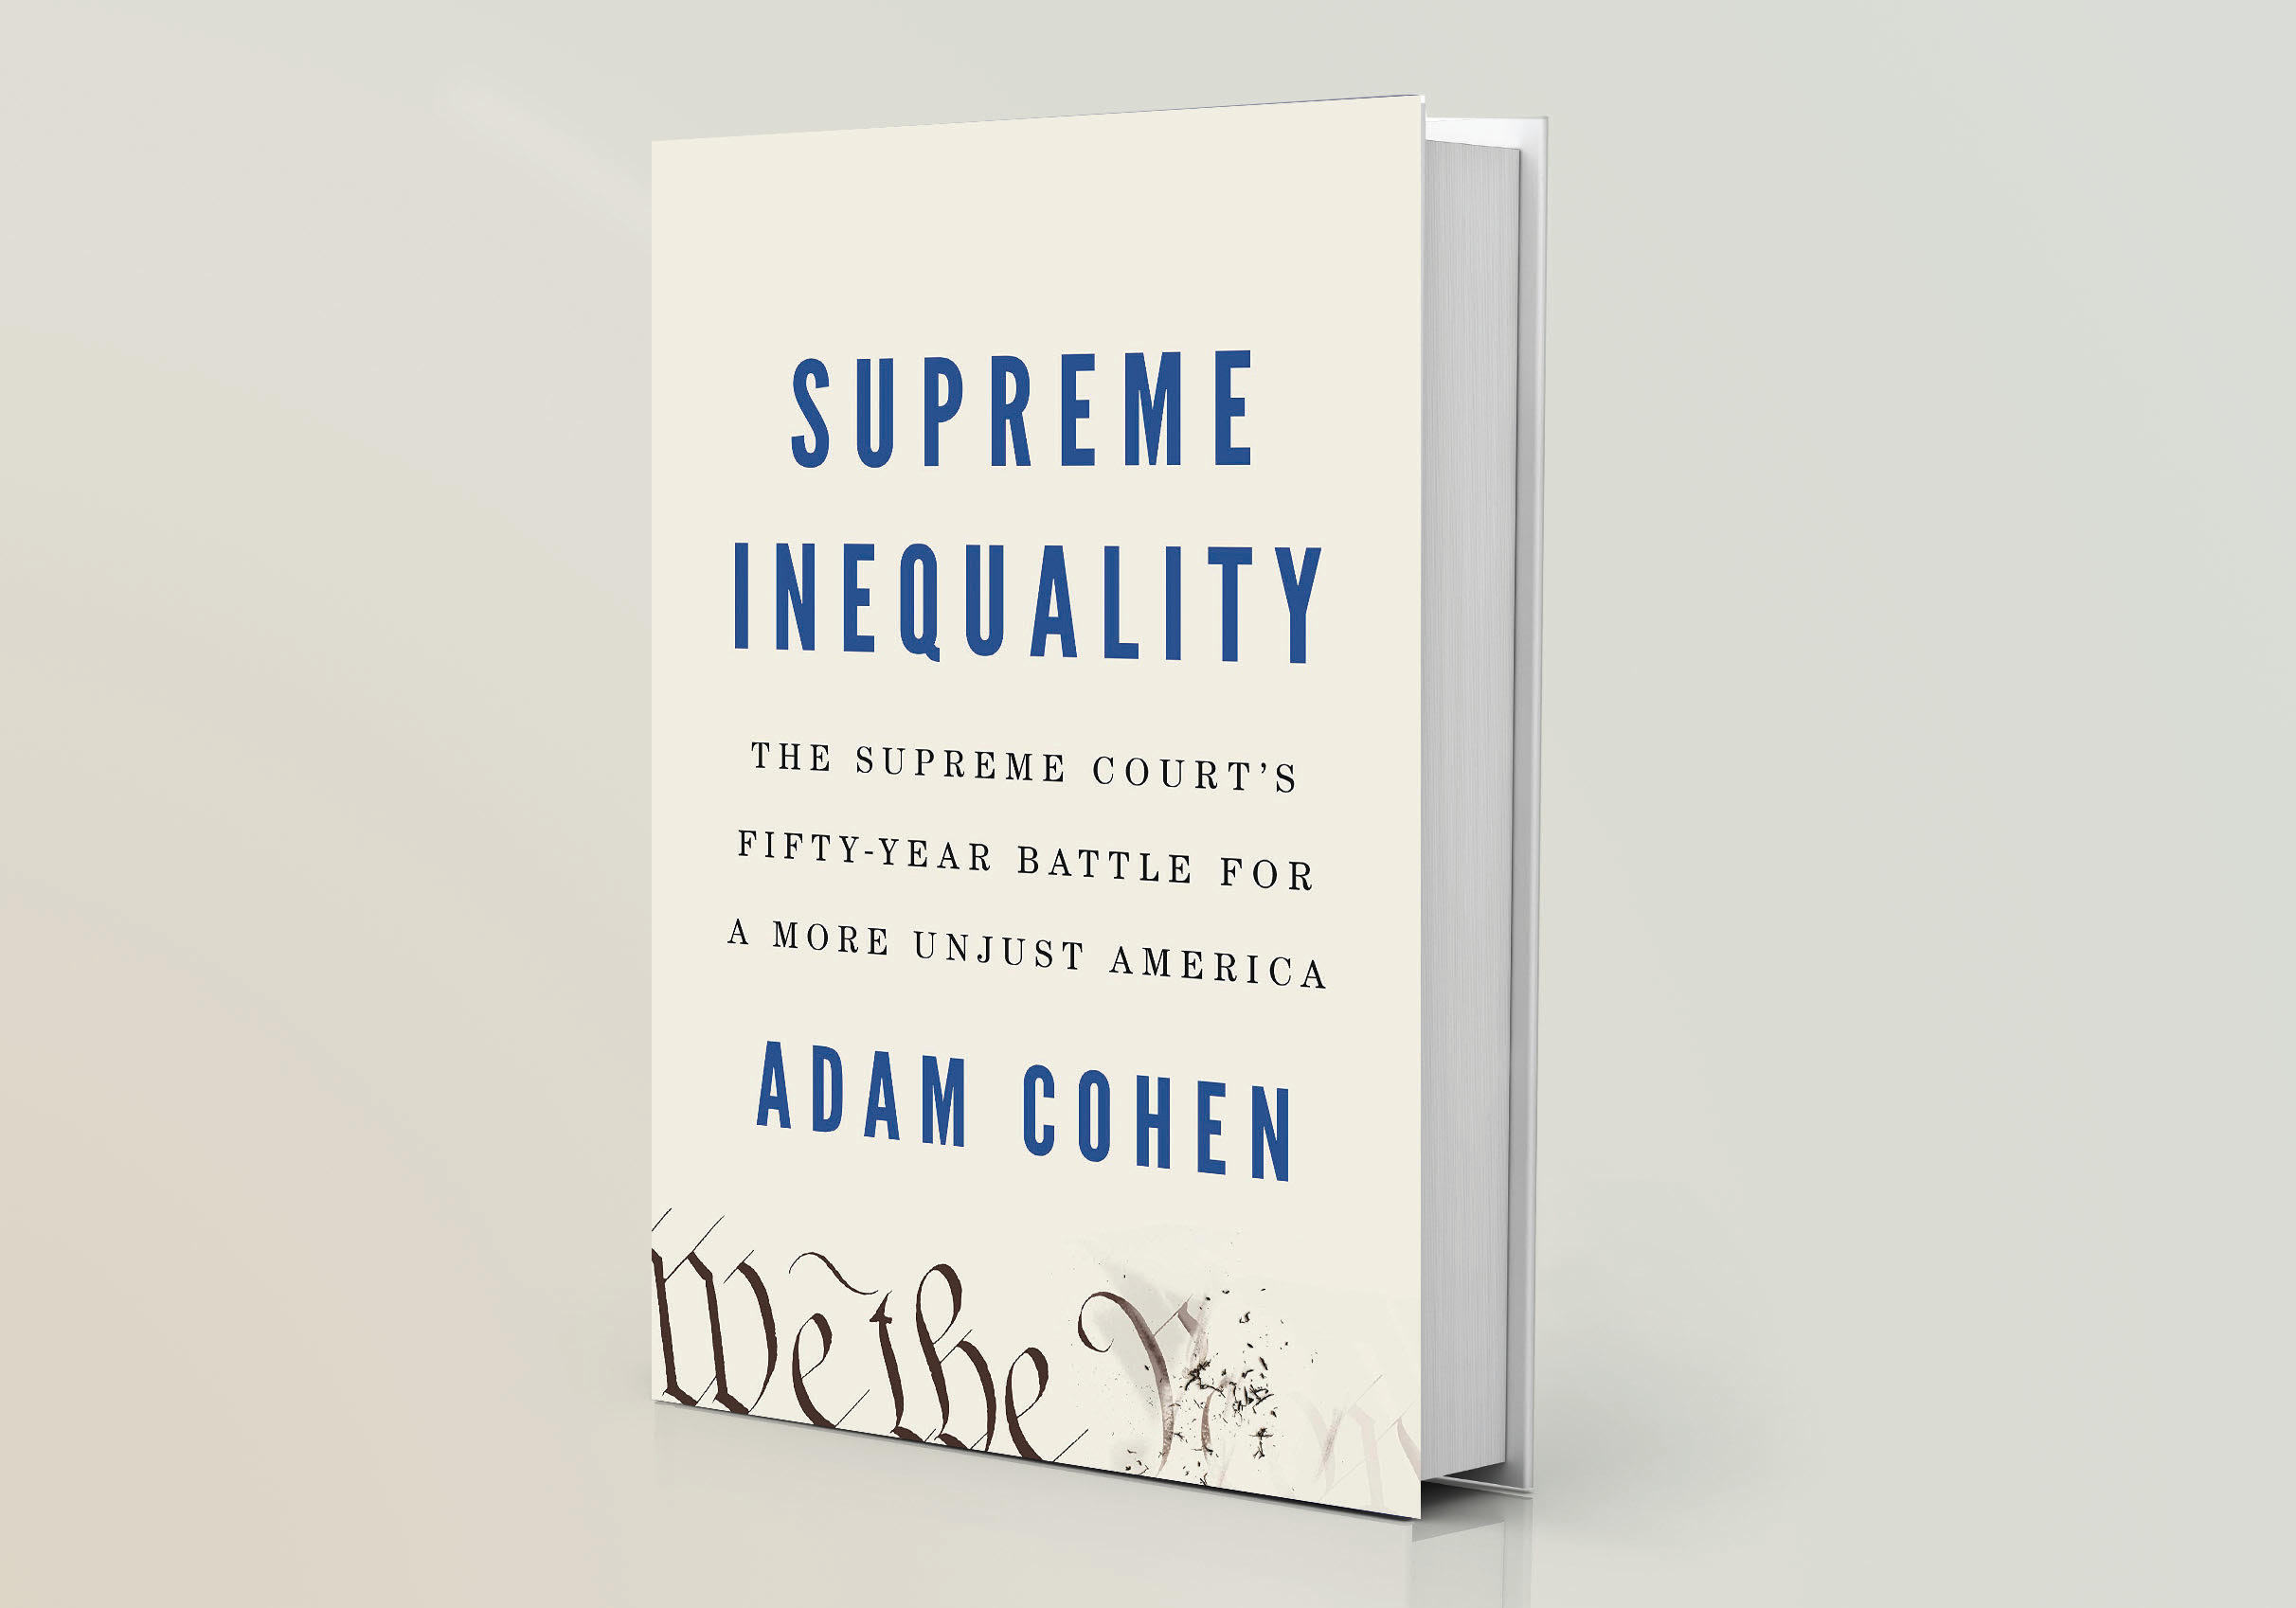 Supreme Inequality: The Supreme Court’s Fifty-Year Battle for a More Unjust America